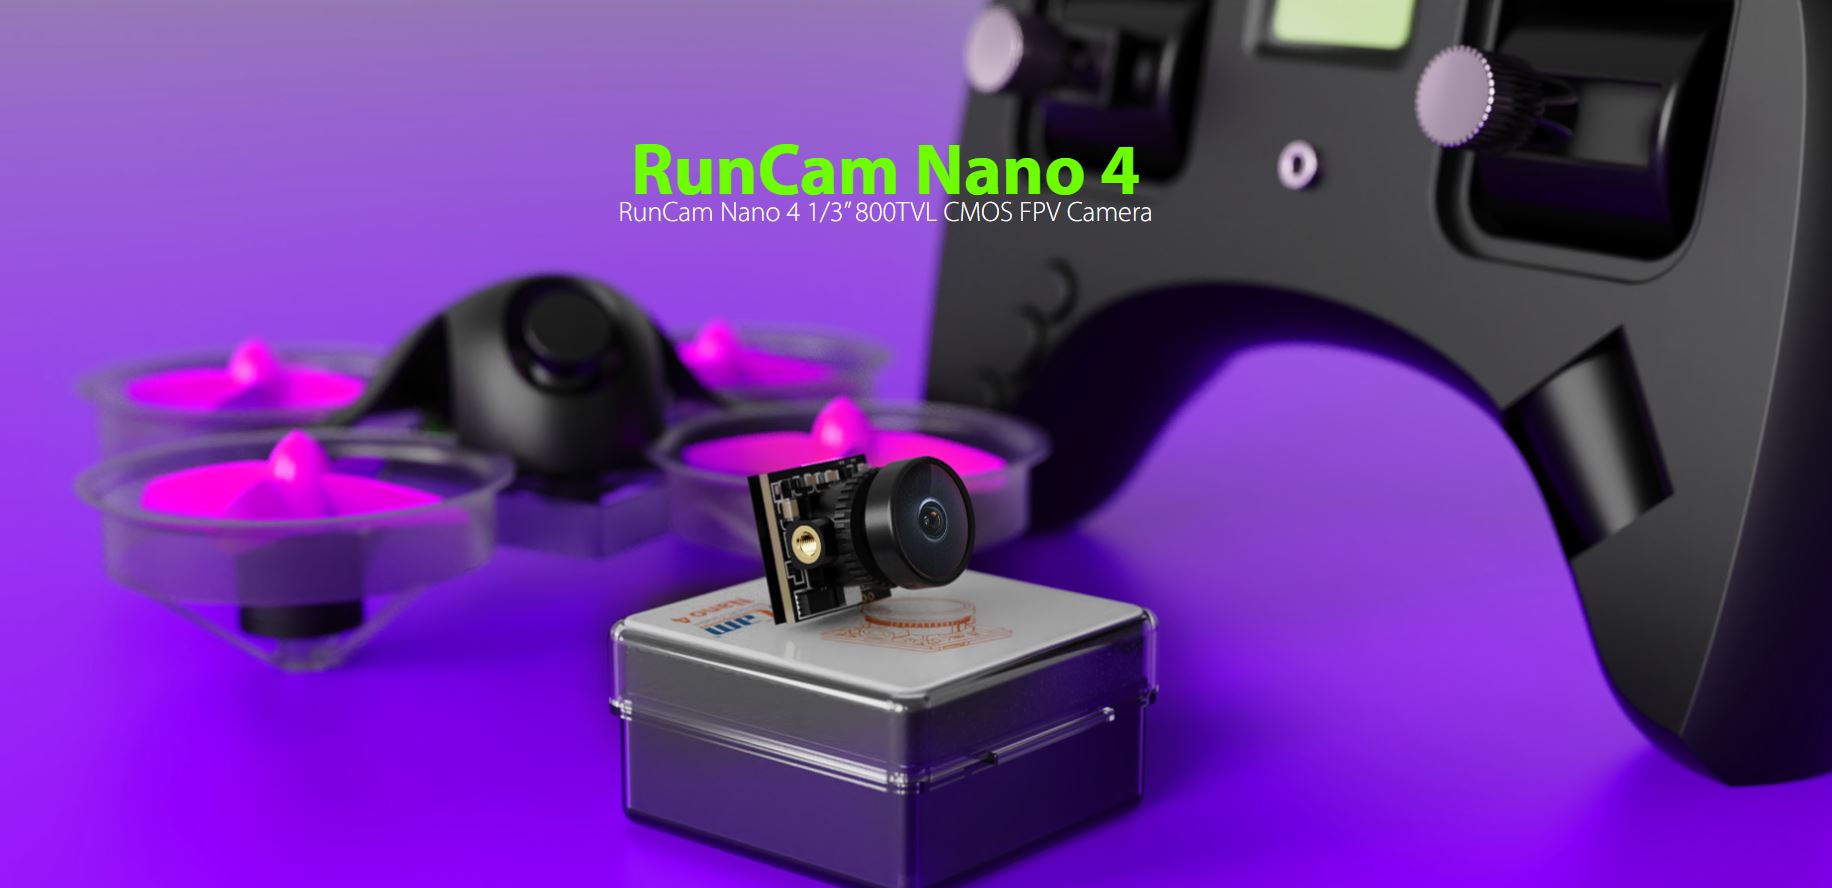 Runcam Nano 4 Camera for FPV Drone Racing and Freestyle sold by PyroDrone